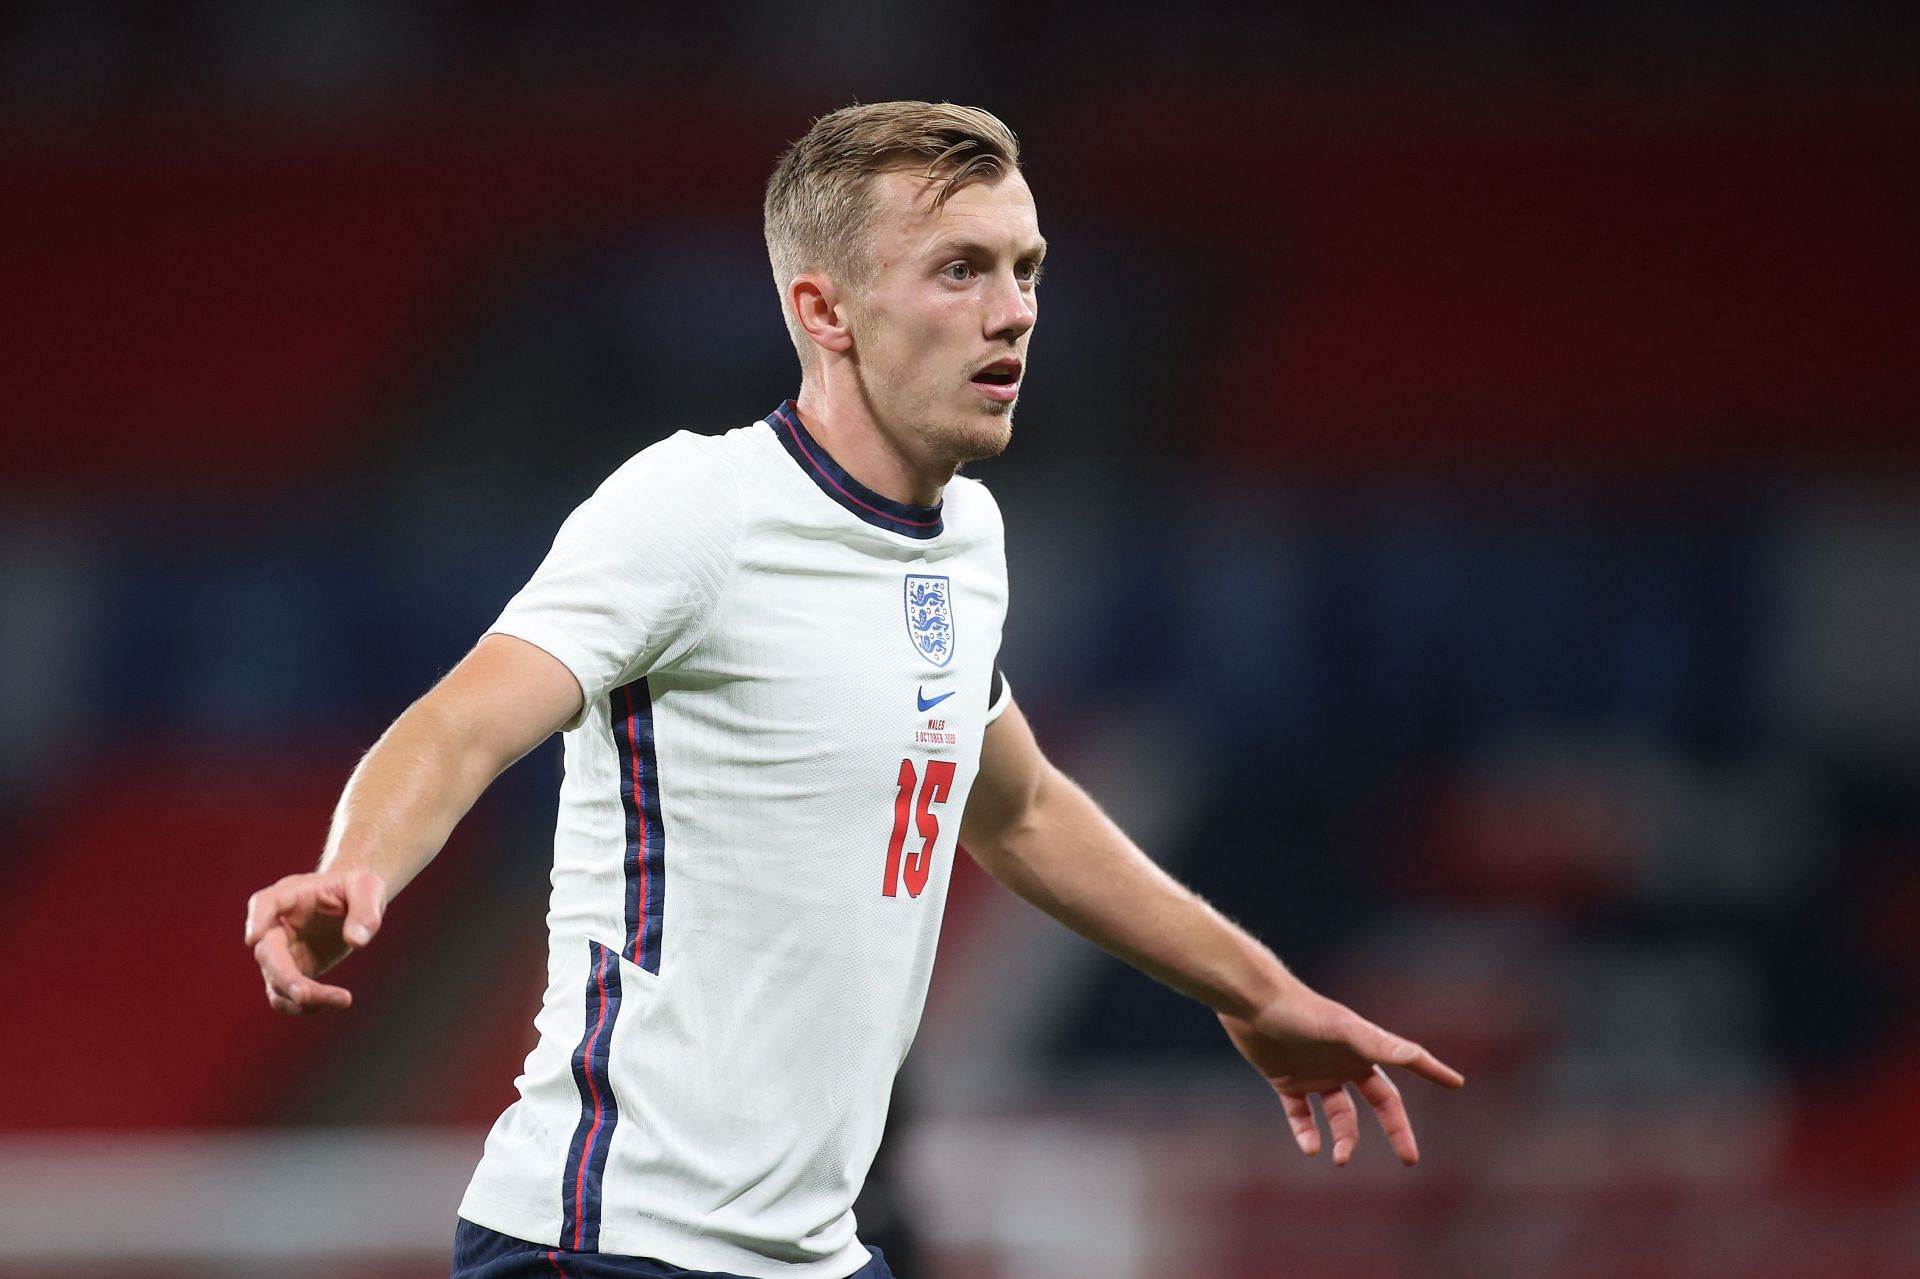 James Ward-Prowse in action for England during an international friendly against Wales